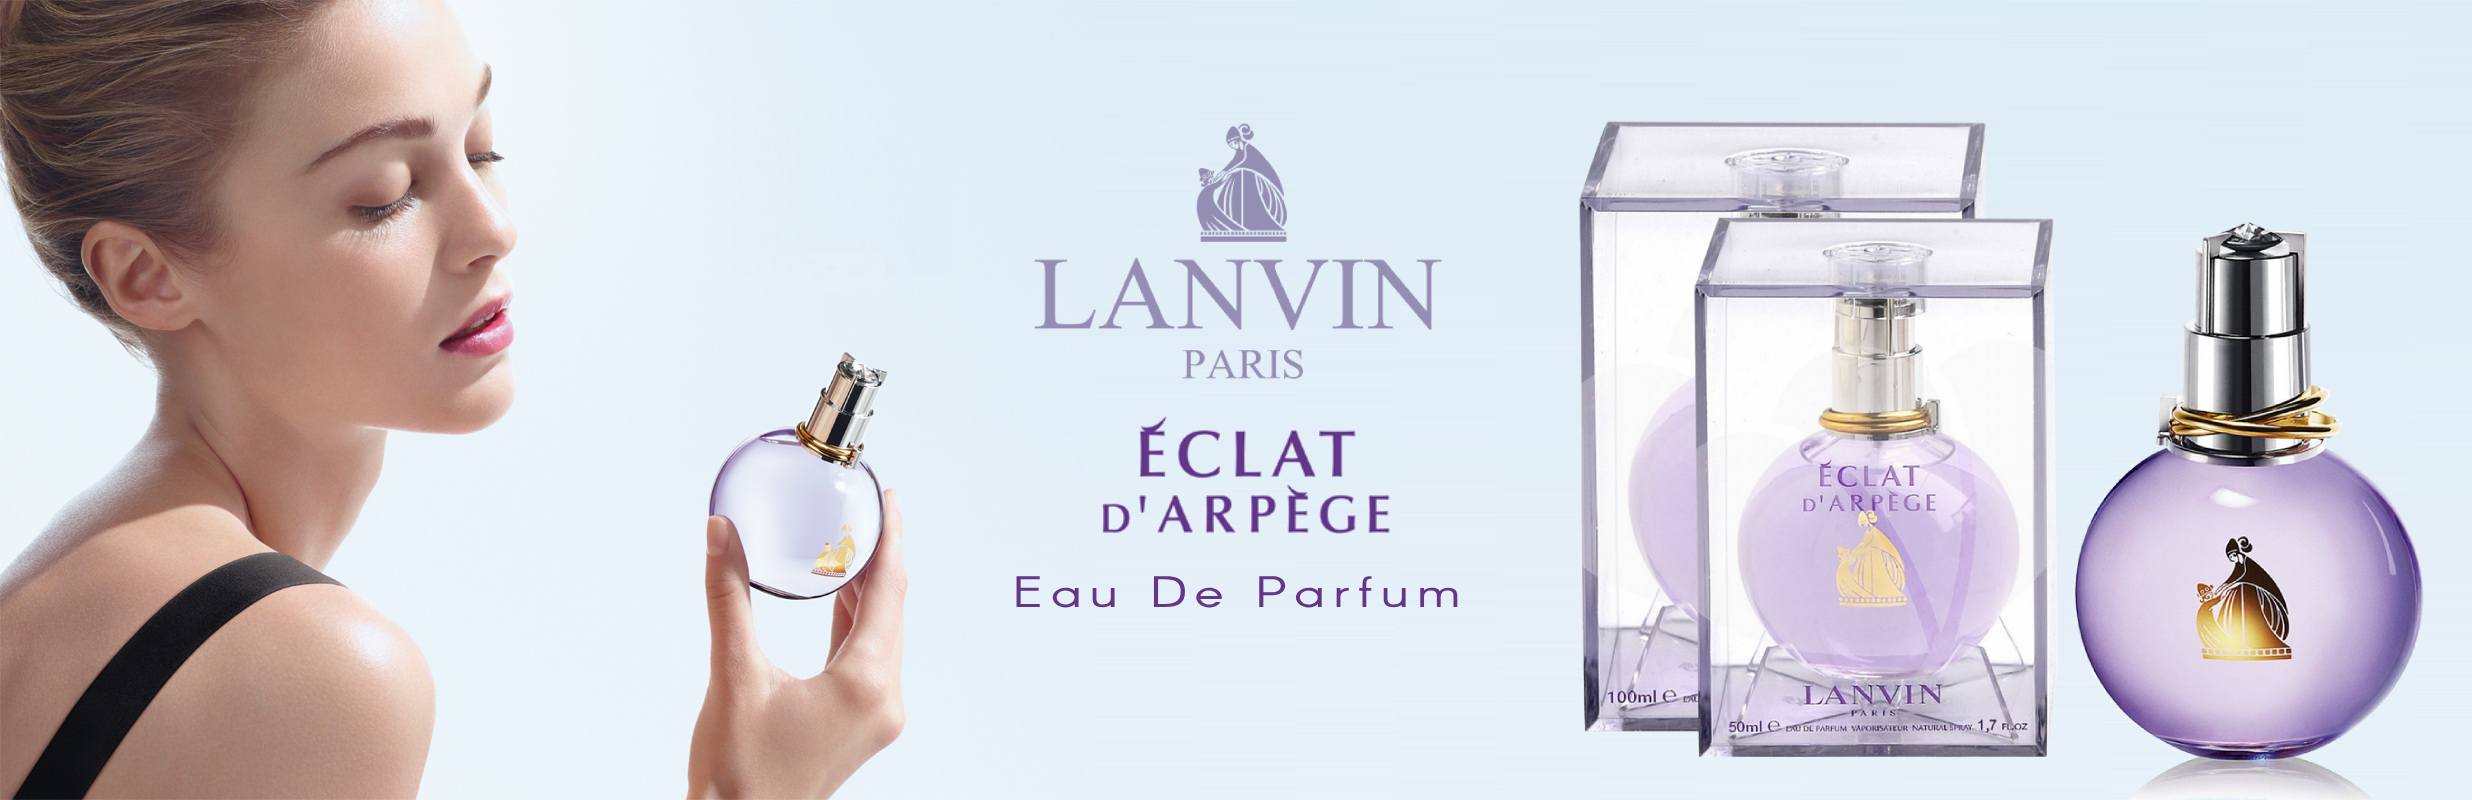 LANVIN perfume for men and women 